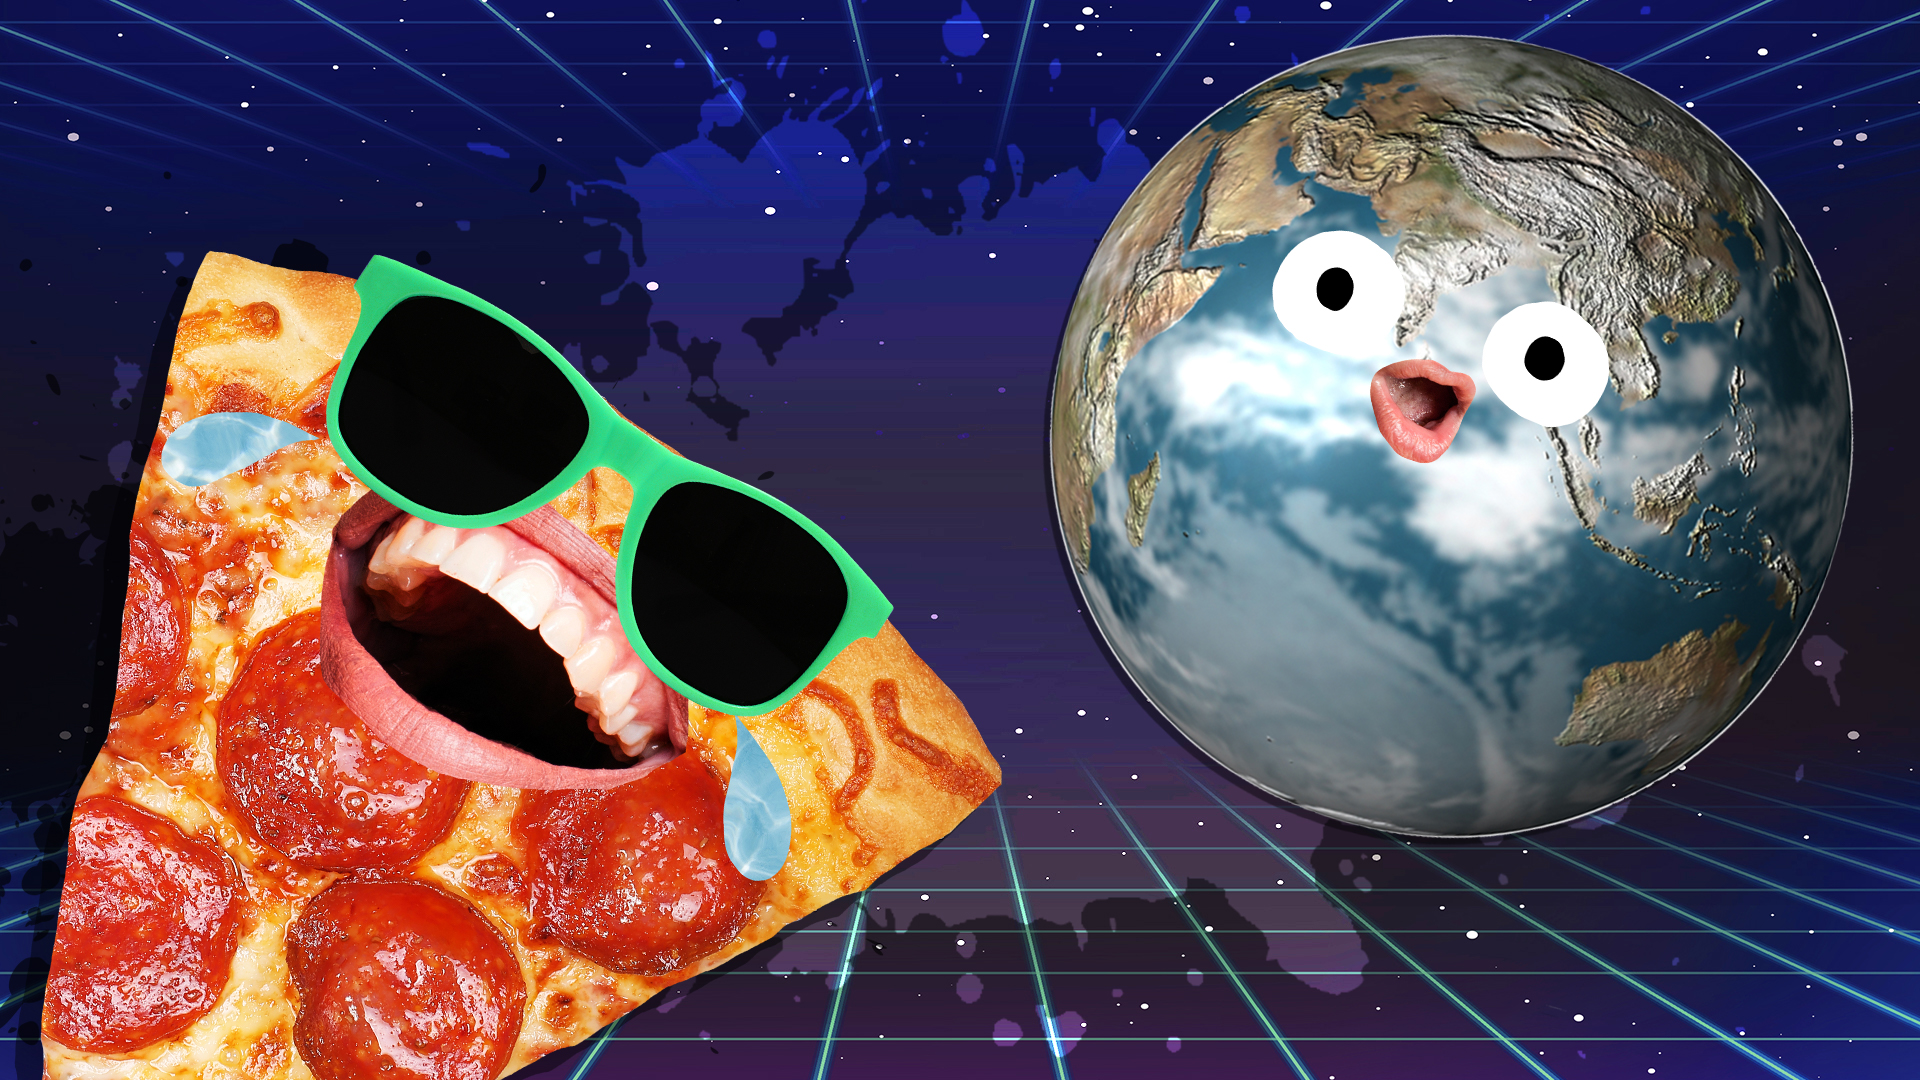 A massive slice of pizza next to the earth